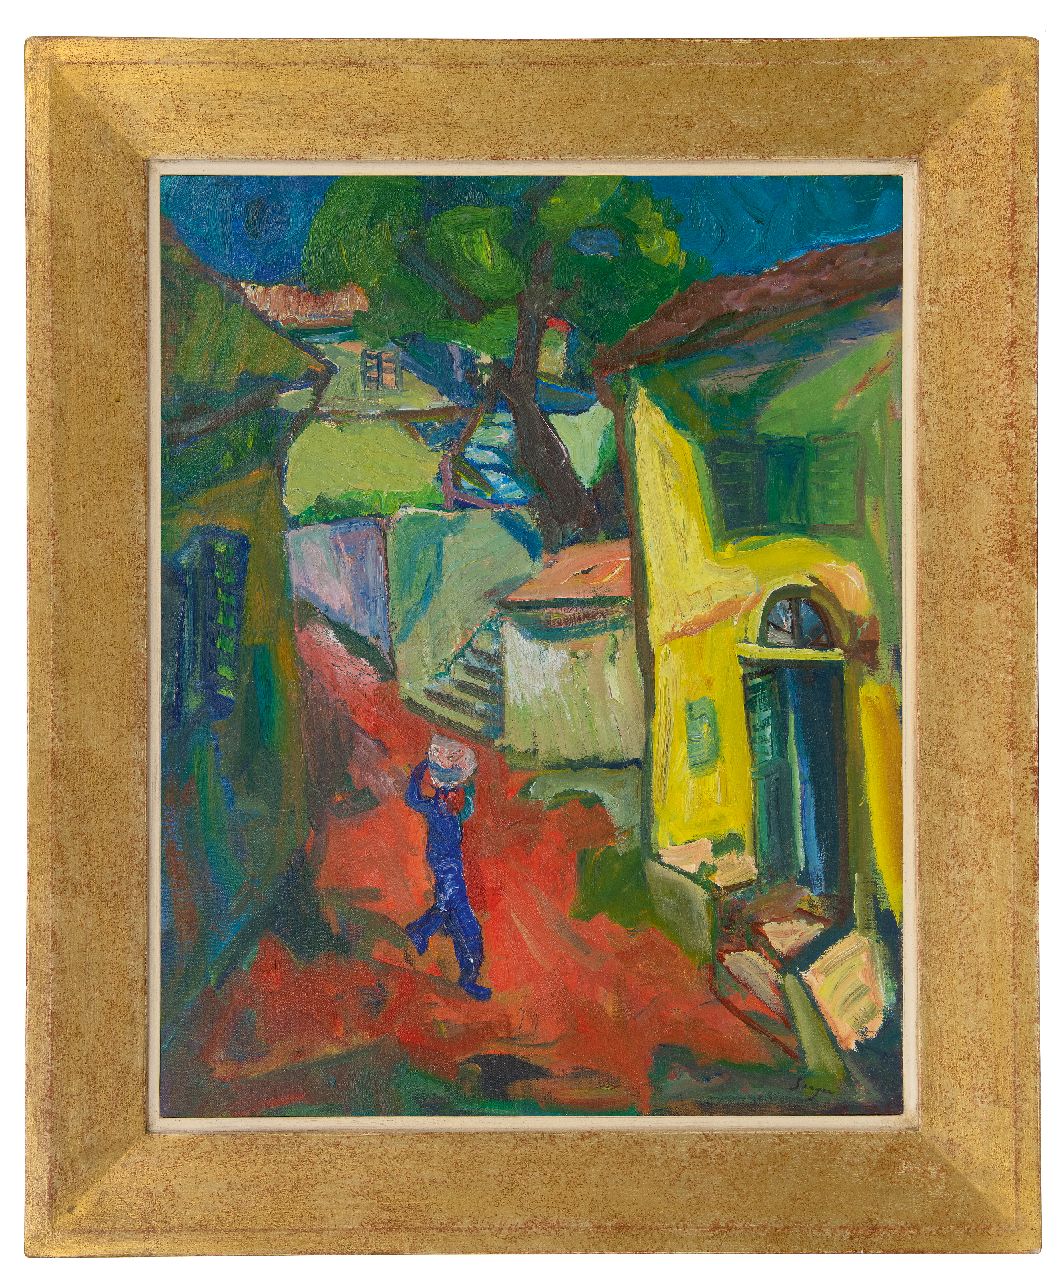 Serger F.B.  | Frederick Bedrich Serger | Paintings offered for sale | Mediterranean village, oil on canvas 71.4 x 56.0 cm, signed l.r.